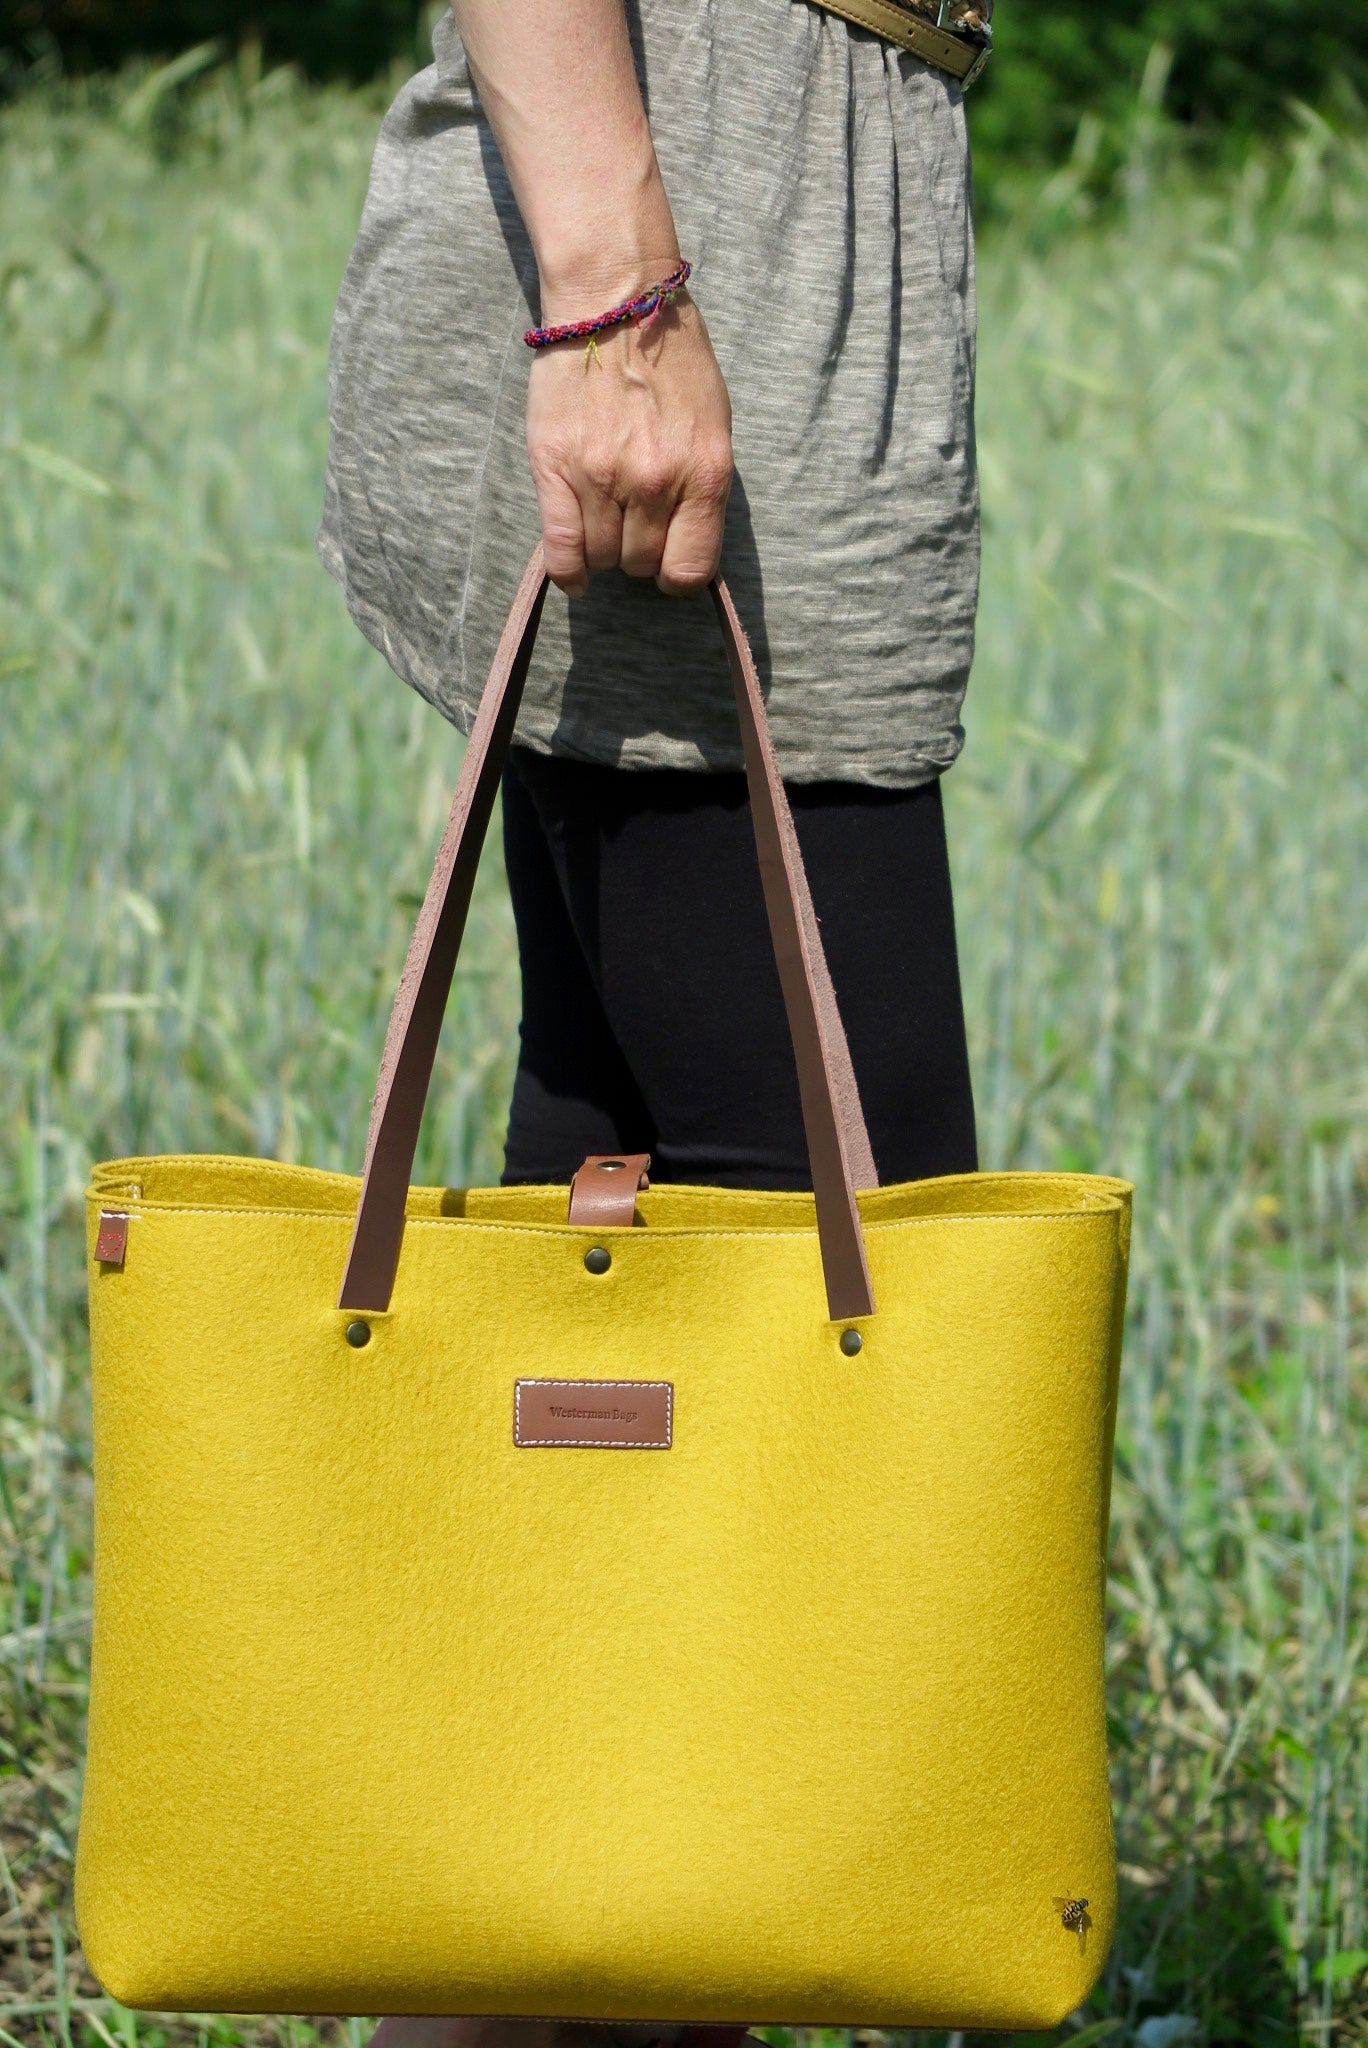 XL SHOPPER bag in yellow wool felt with leather handles